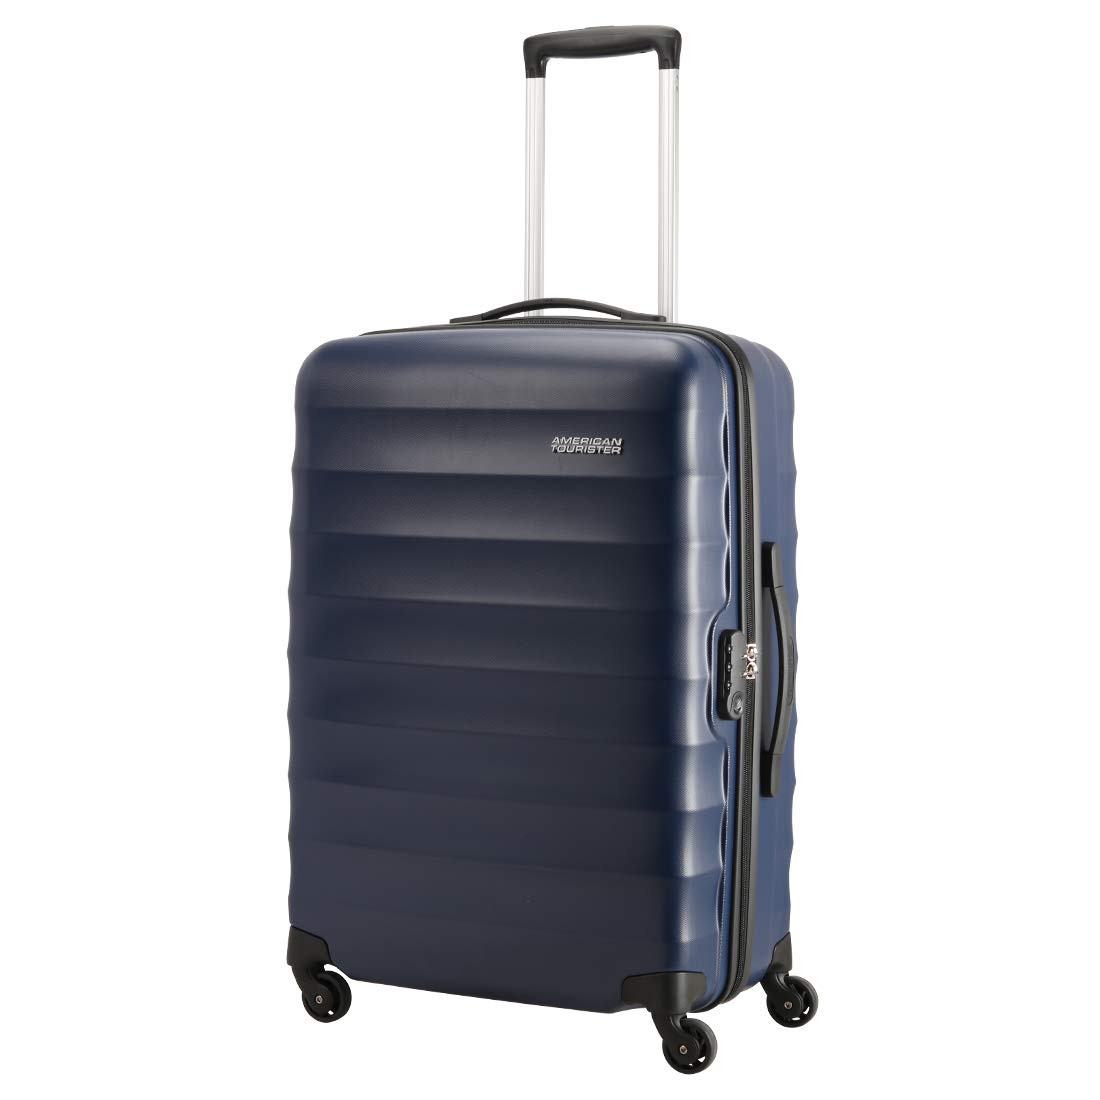 American Tourister Trolley Bag for Travel  Barcelona 79 Cms Polycarbonate Hardsided Large Check-in Luggage Bag  Suitcase for Travel  Trolley Bag for Travelling Midnight Blue